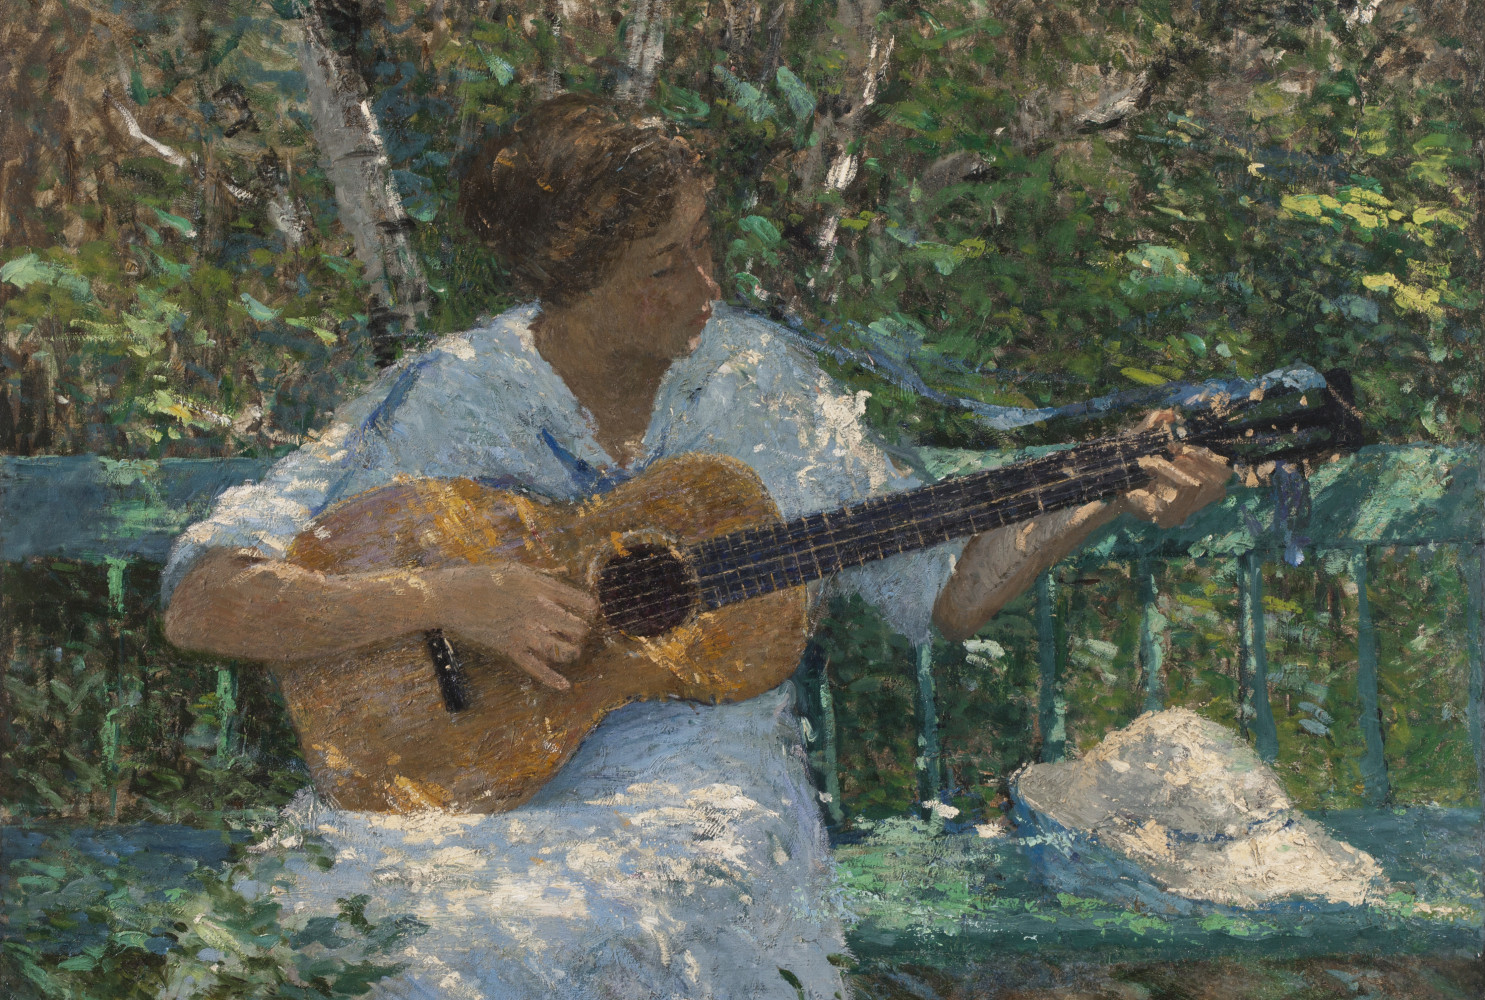 A Song of Summer, circa 1915
By Helen Maria Turner (American, 1858 - 1958); Oil on canvas; 30 1/8 x 40 1/8 inches; Framed: 38 1/2 x 48 1/2 x 3 3/8 inches; 2004.12.04; The Johnson Collection, Spartanburg, South Carolina